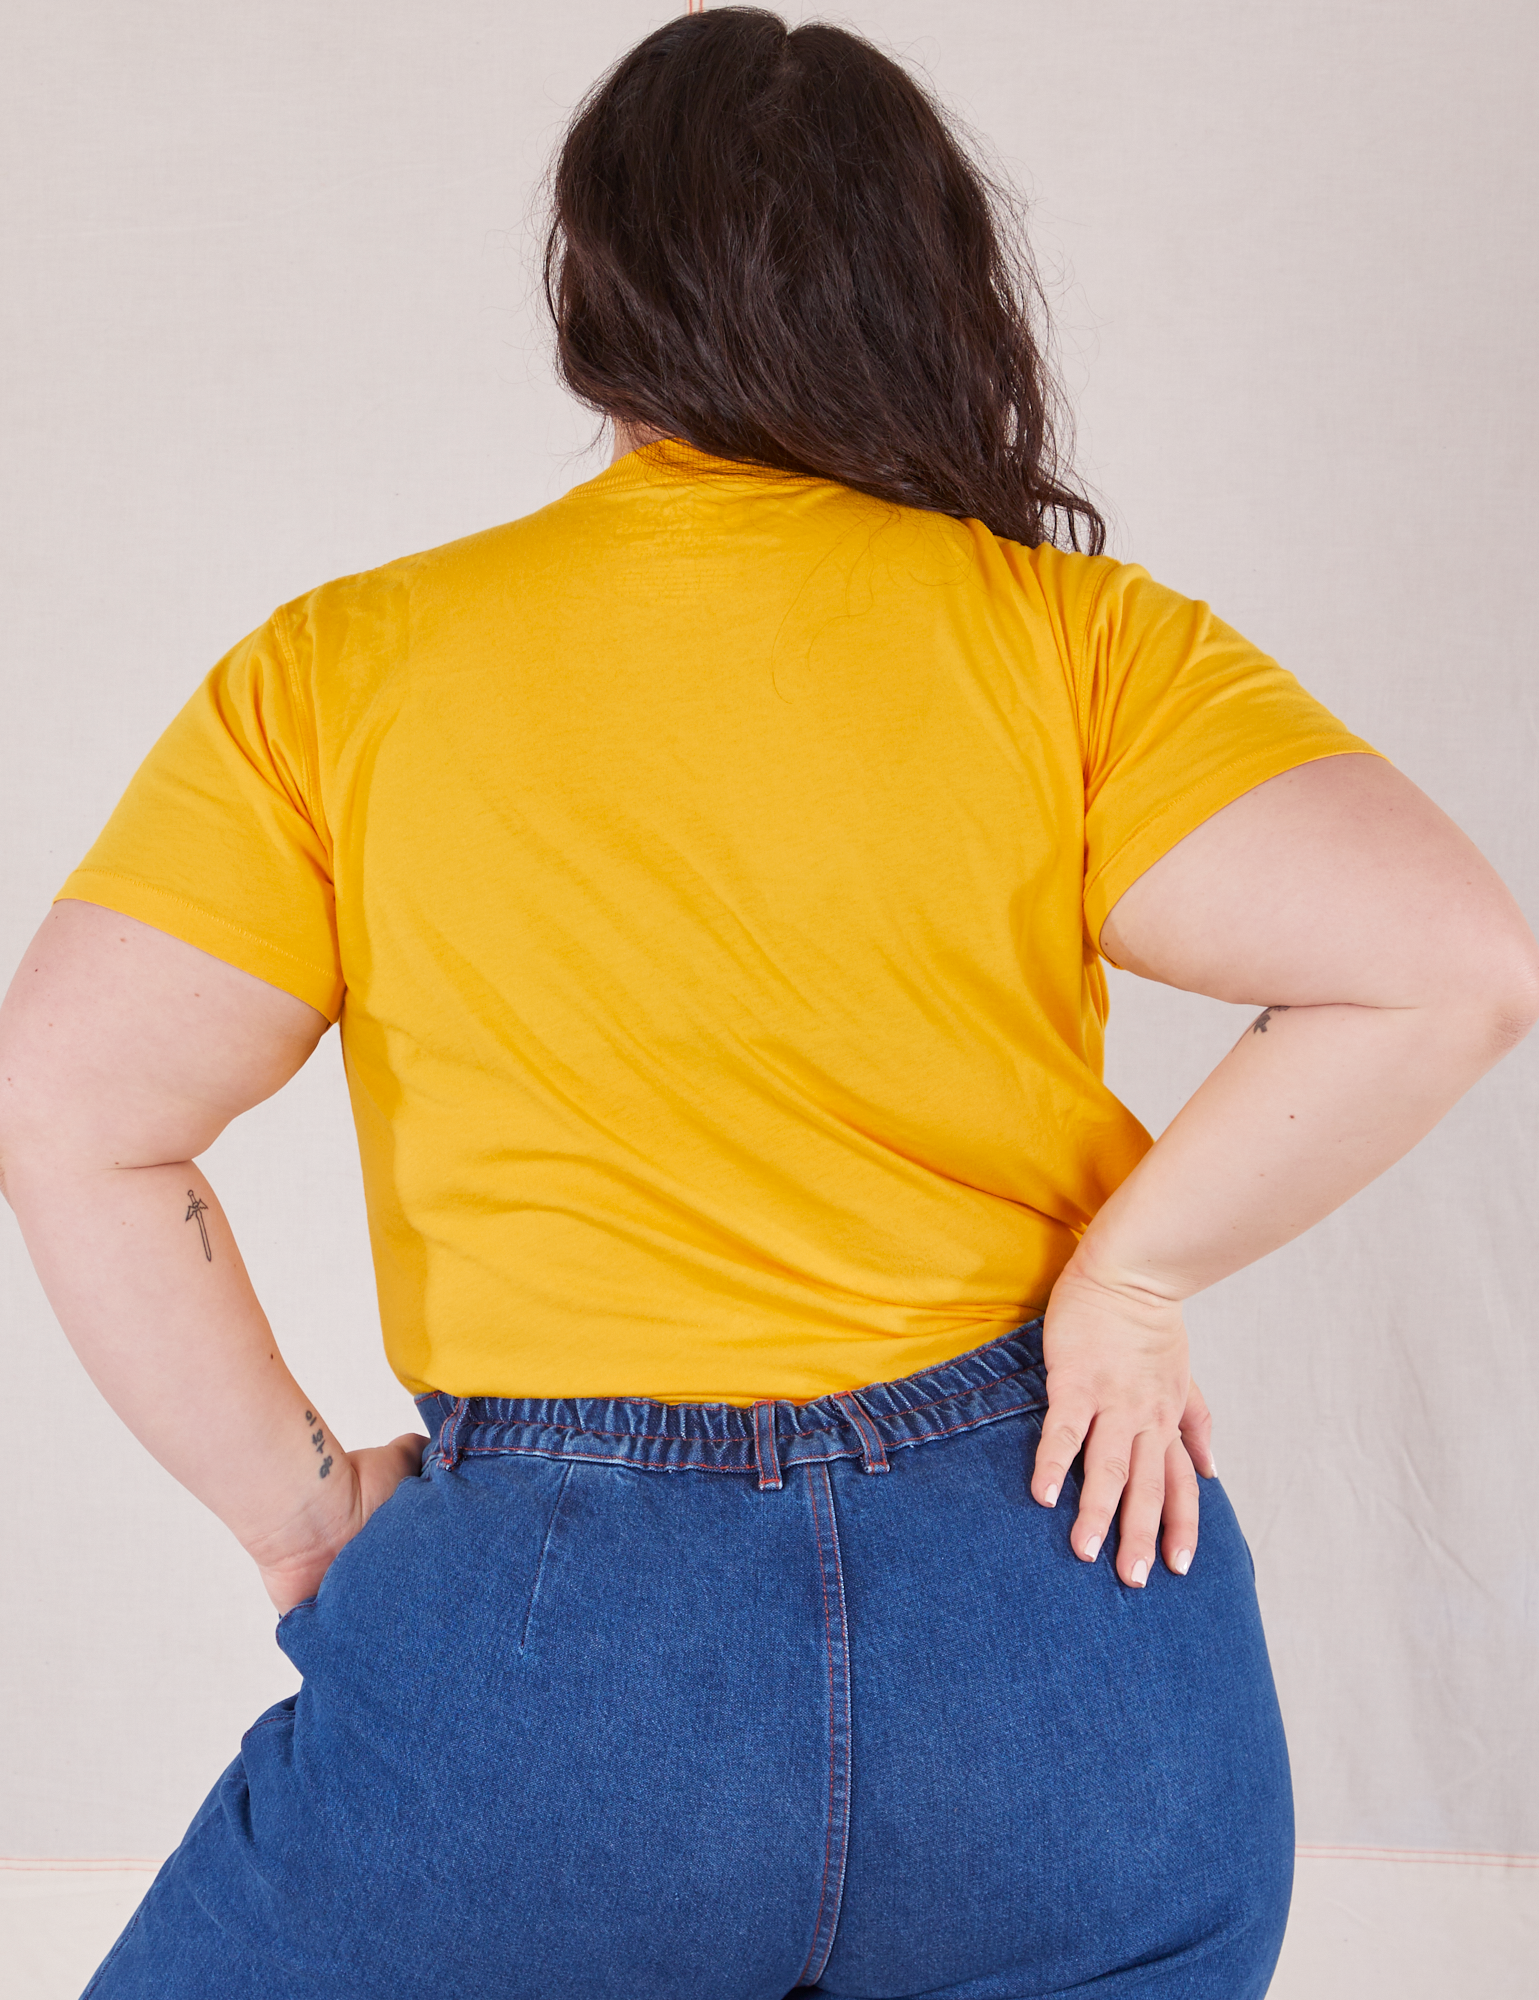 Organic Vintage Tee in Sunshine Yellow back view on Ashley